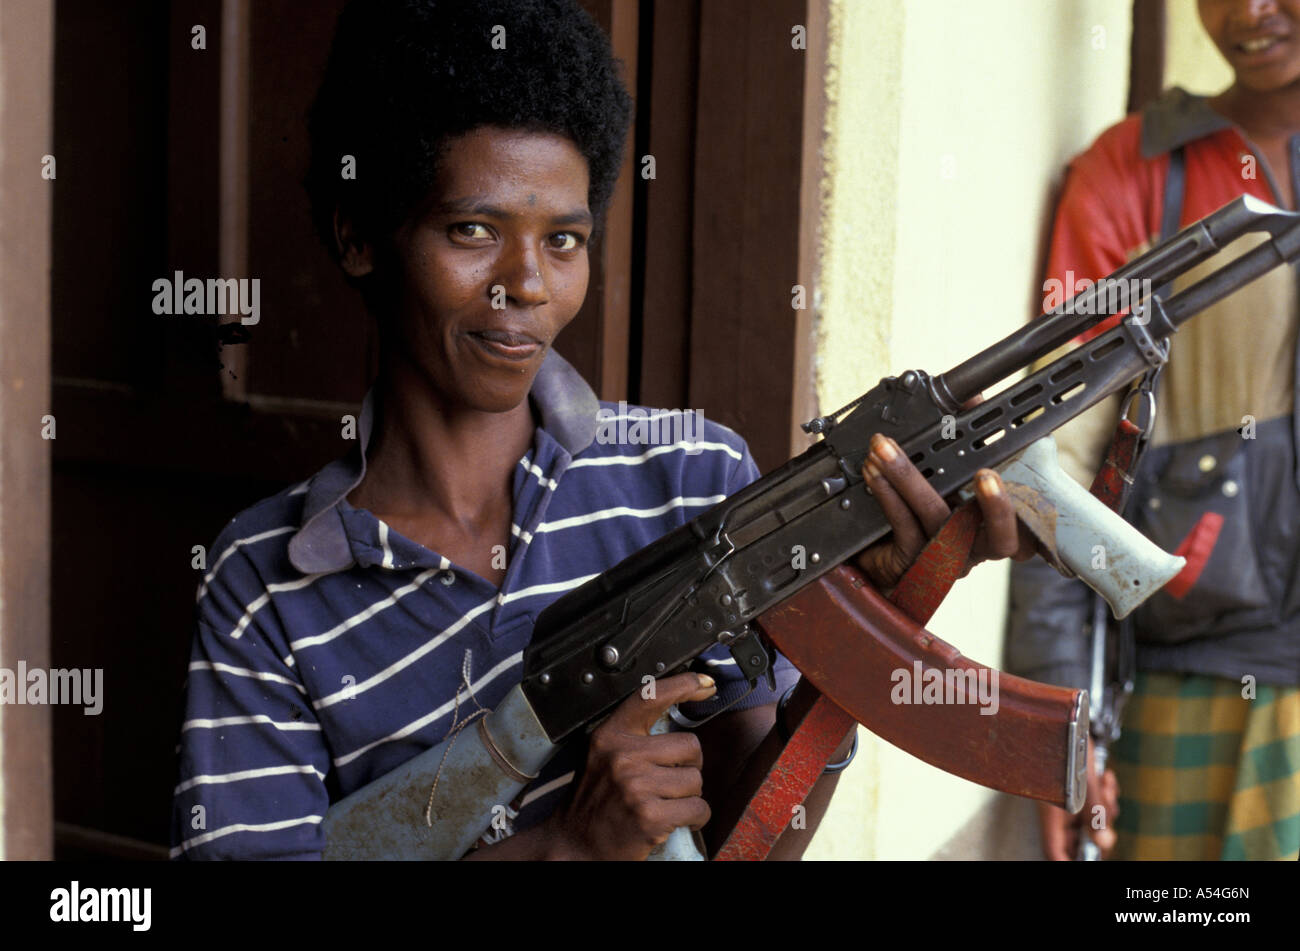 Painet hq1429 ethiopia female soldier oroma liberation front hararge ak47 arms fighter gun images unrest war country Stock Photo